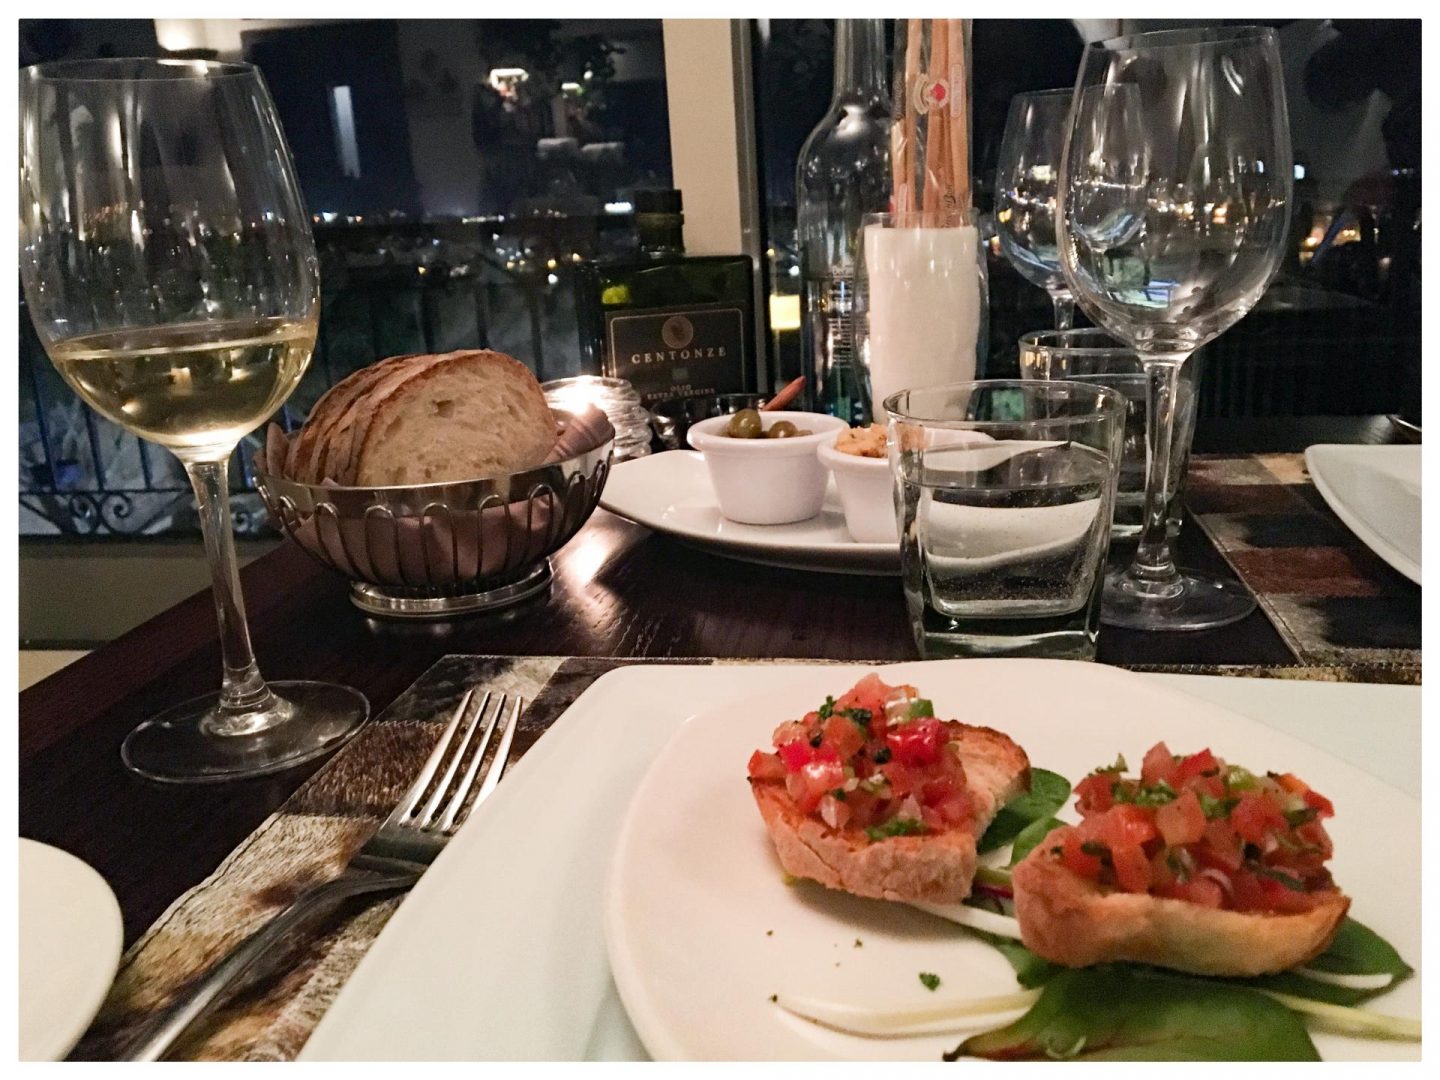 5 best places to eat and drink in Malta, including Giannini, Valetta. www.kittyandb.com